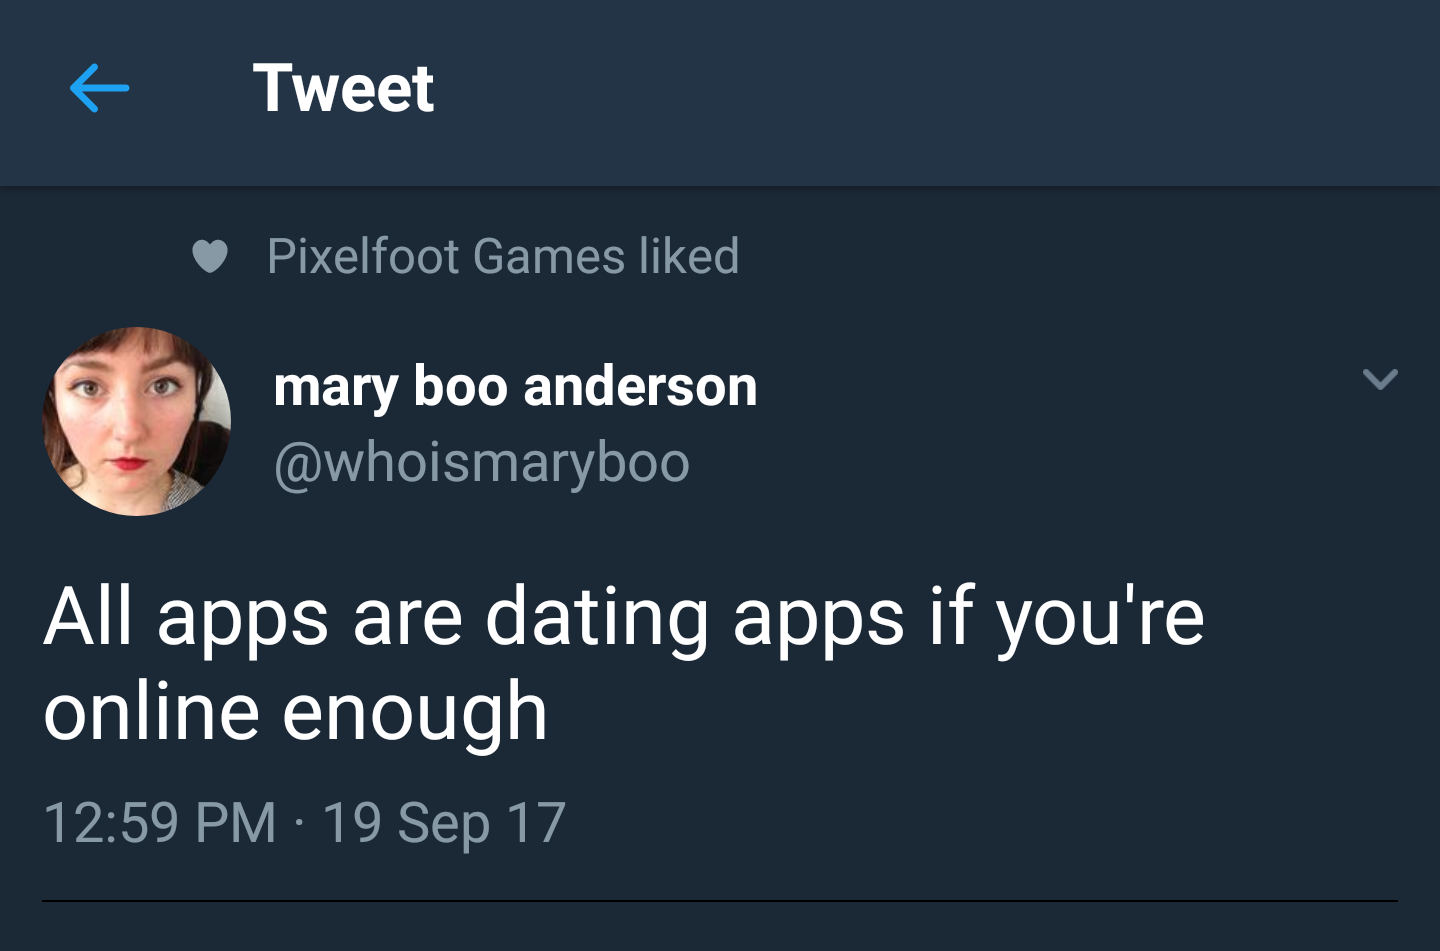 presentation - Tweet Pixelfoot Games d mary boo anderson All apps are dating apps if you're online enough 19 Sep 17